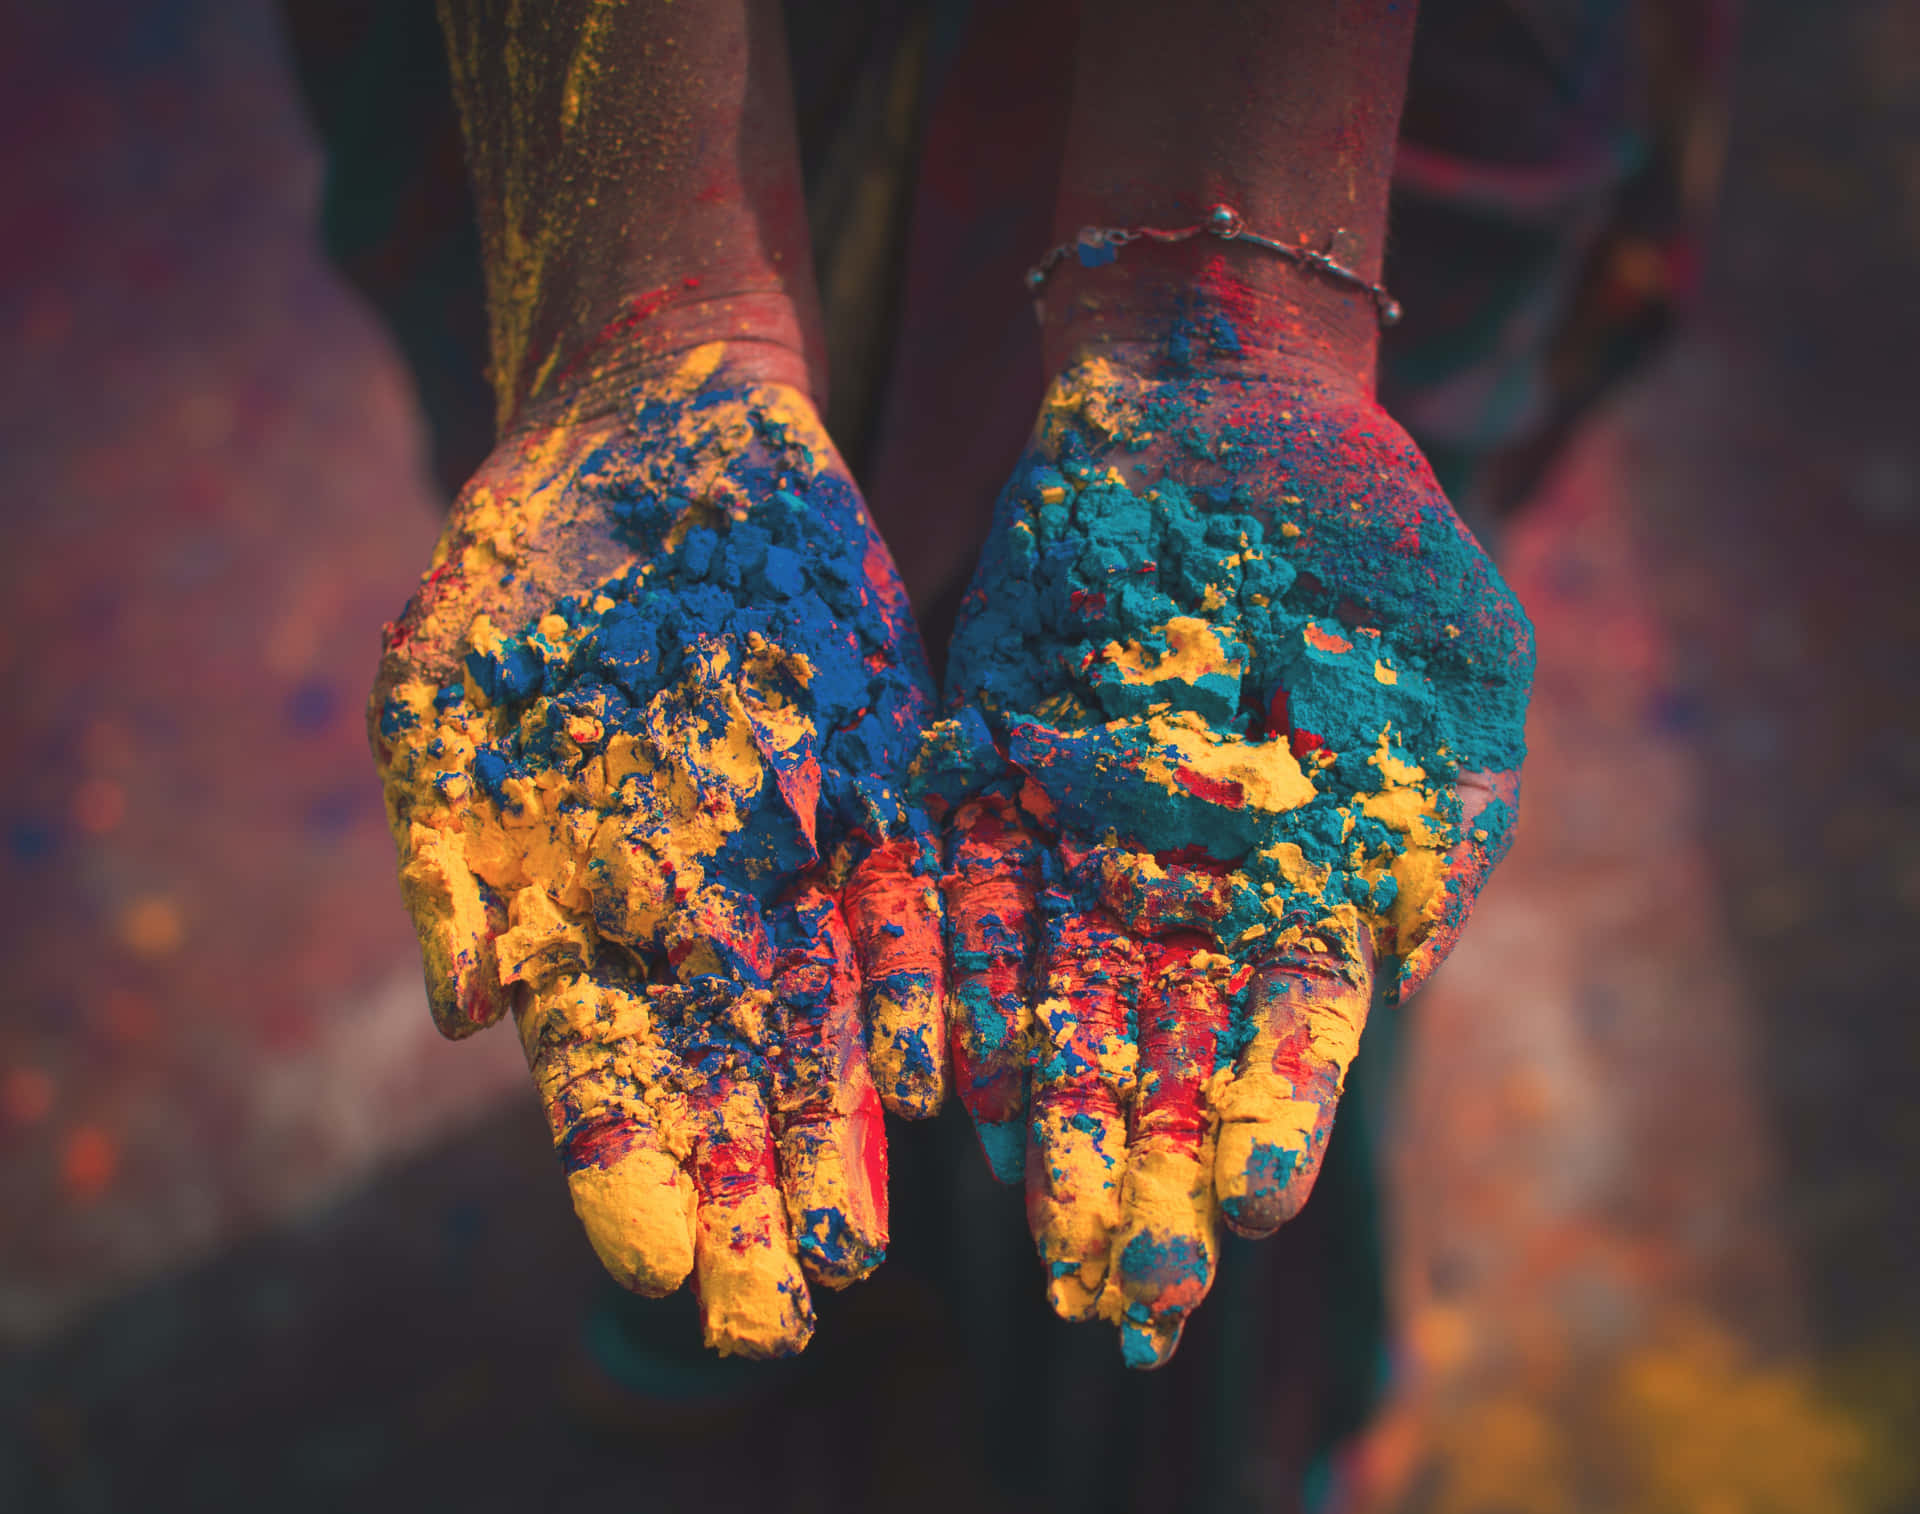 holi festival - woman's hands covered in colored powder